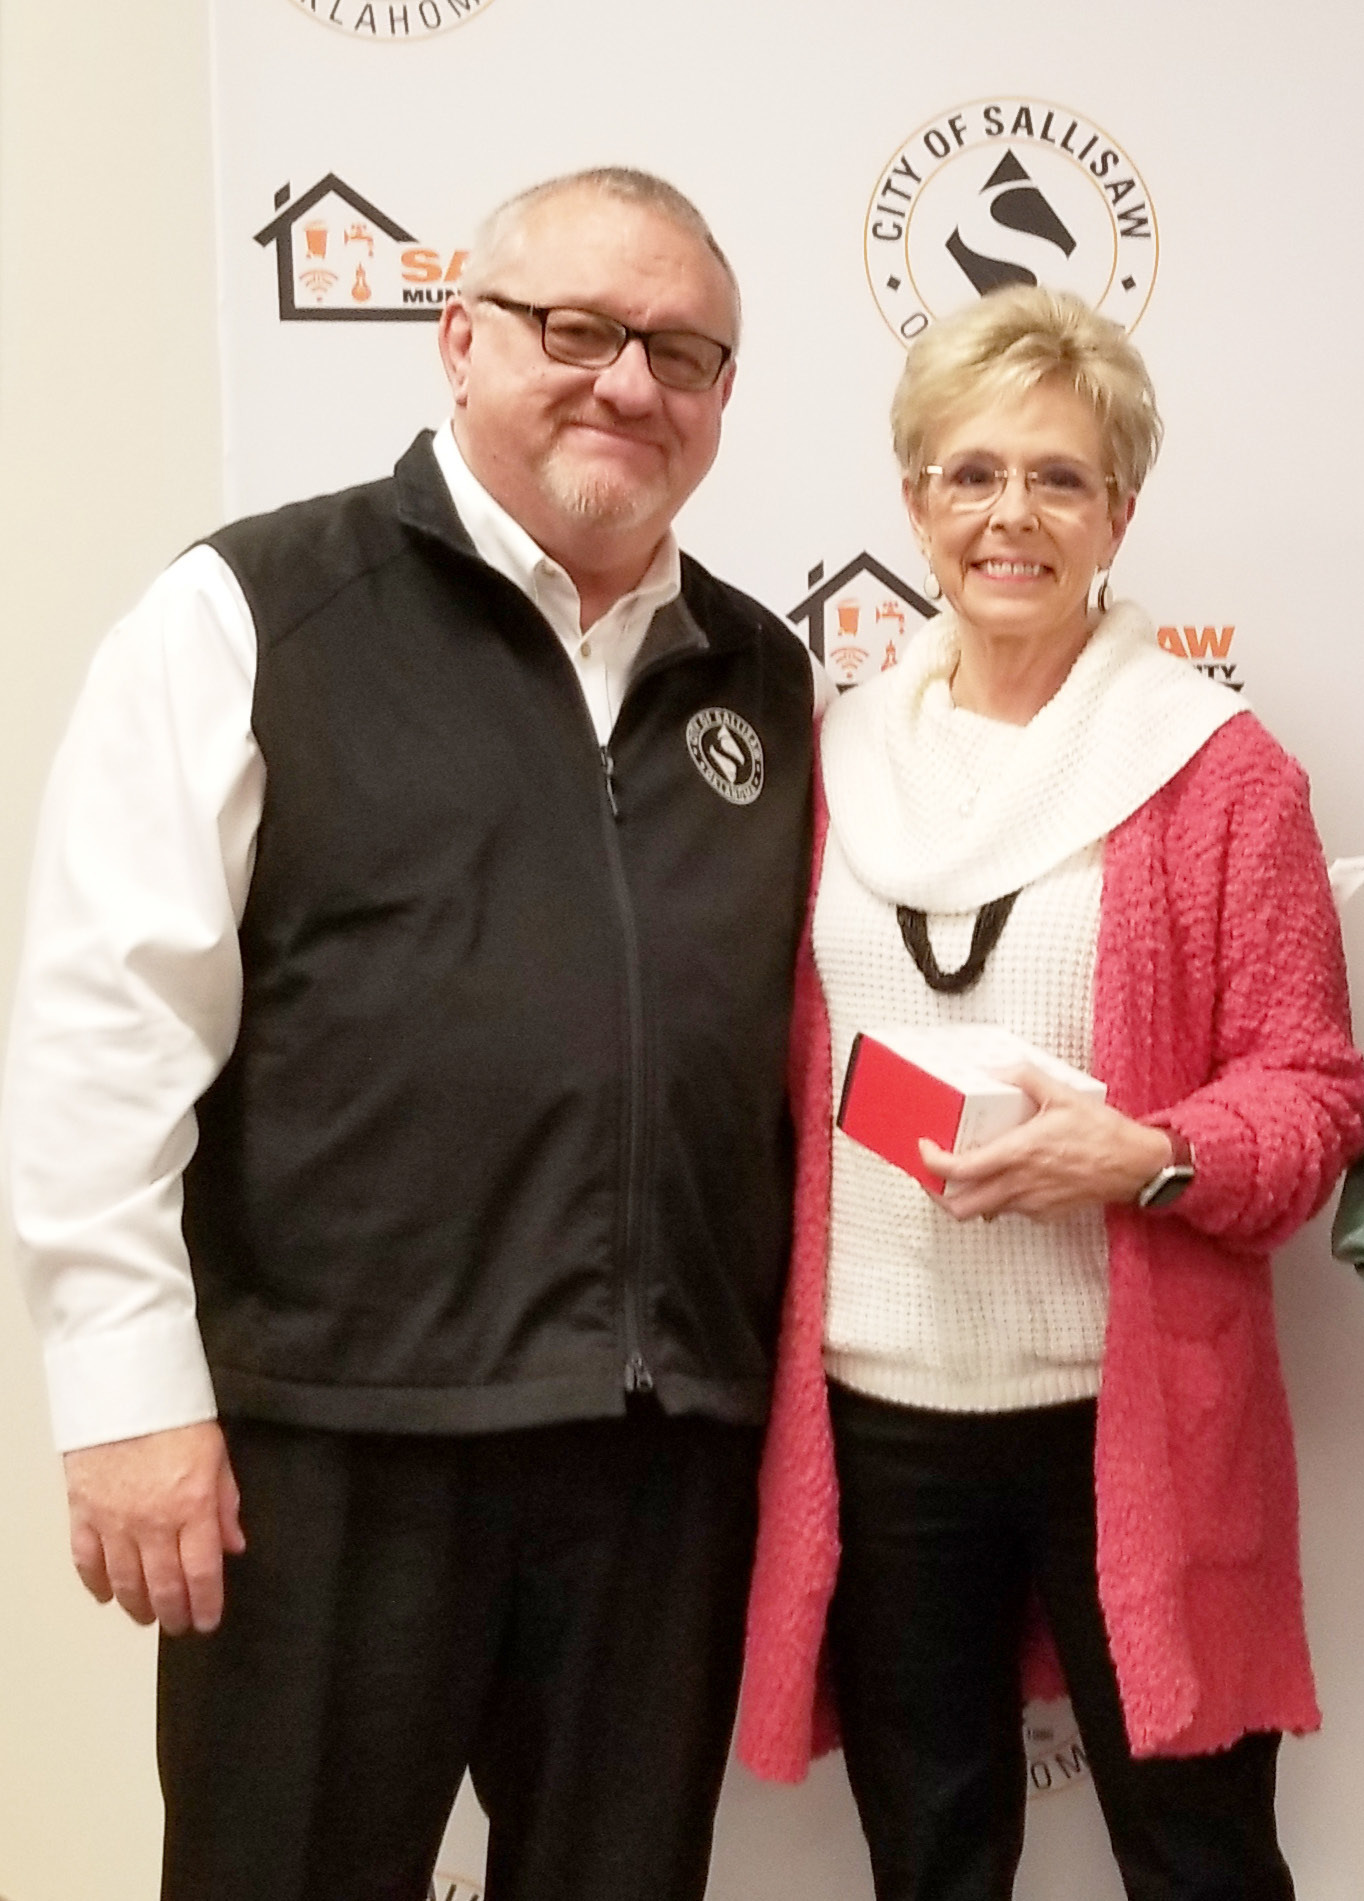 Sallisaw City Manager Keith Skelton presents a gold watch to Debra Washington, who is retiring from the city after 26 years. LYNN ADAMS | TIMES